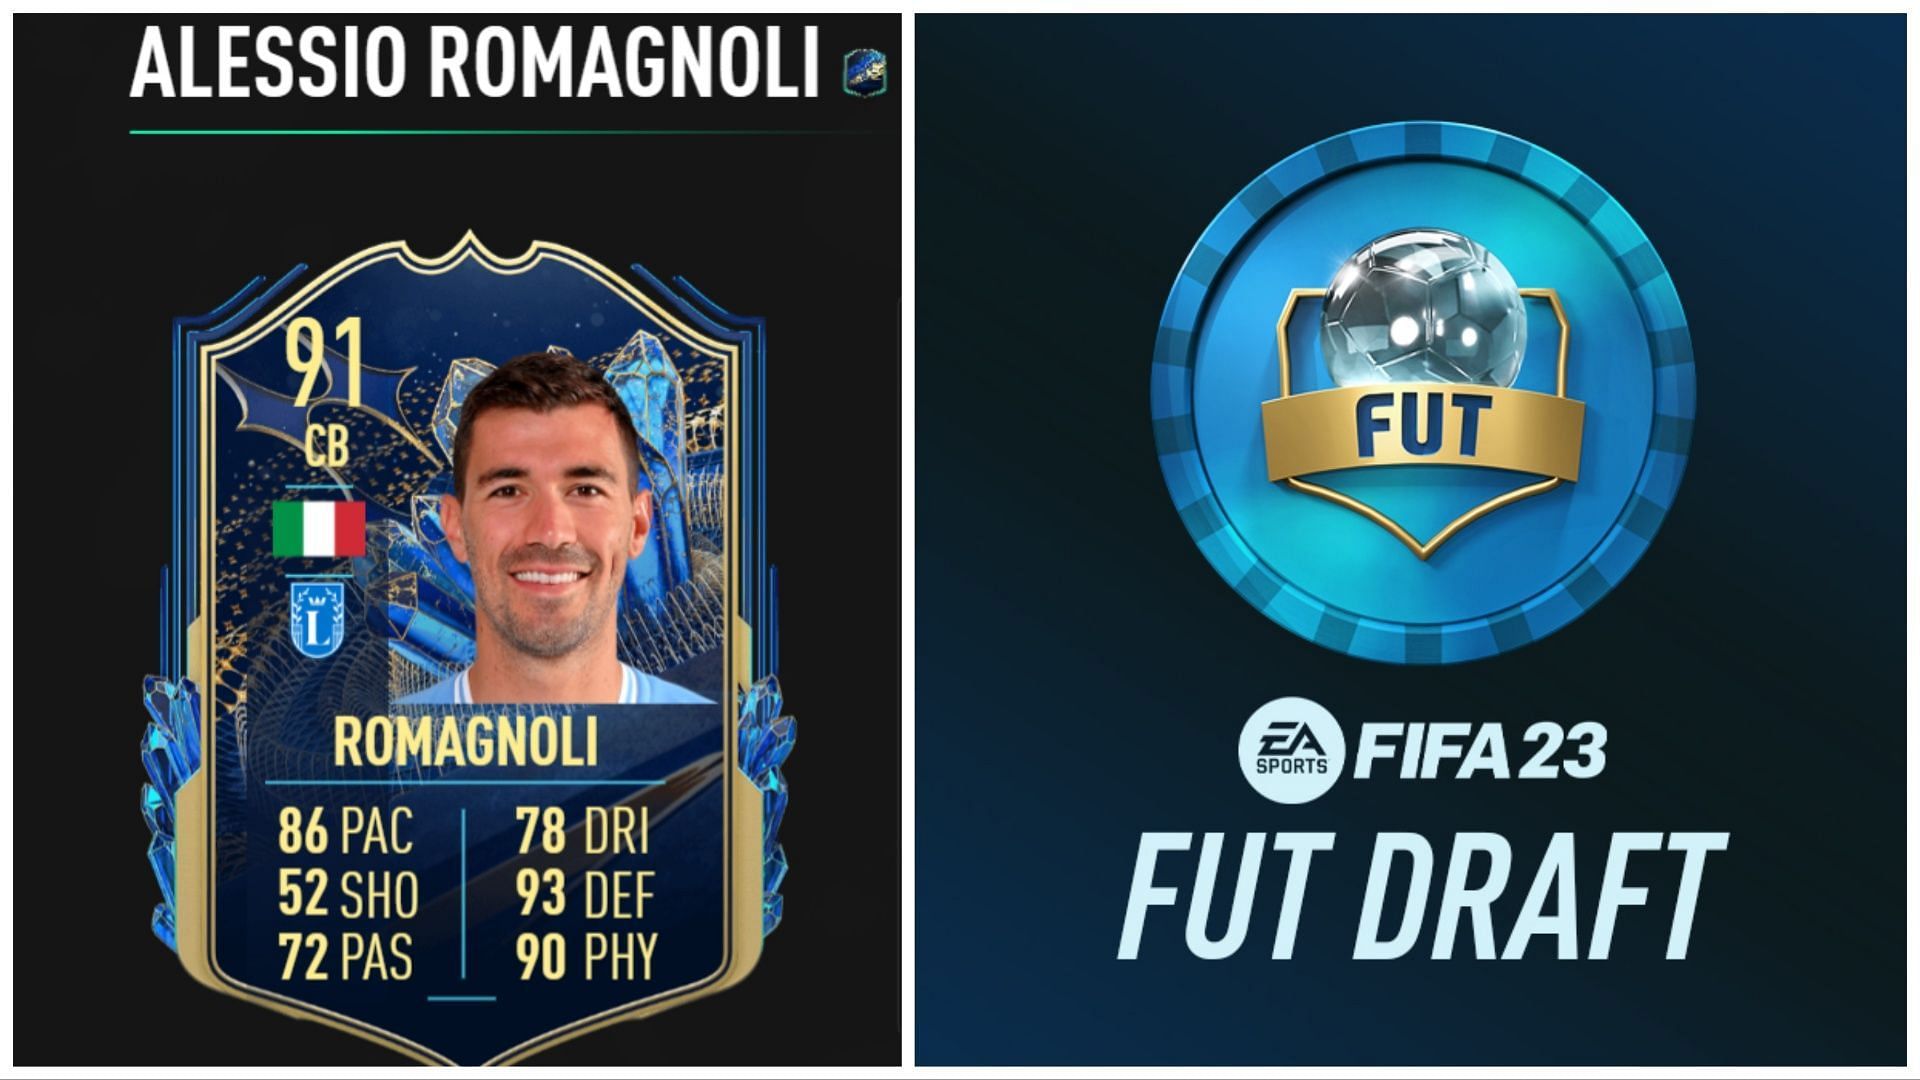 The TOTS Draft Drive objective is now live (Images via EA Sports)